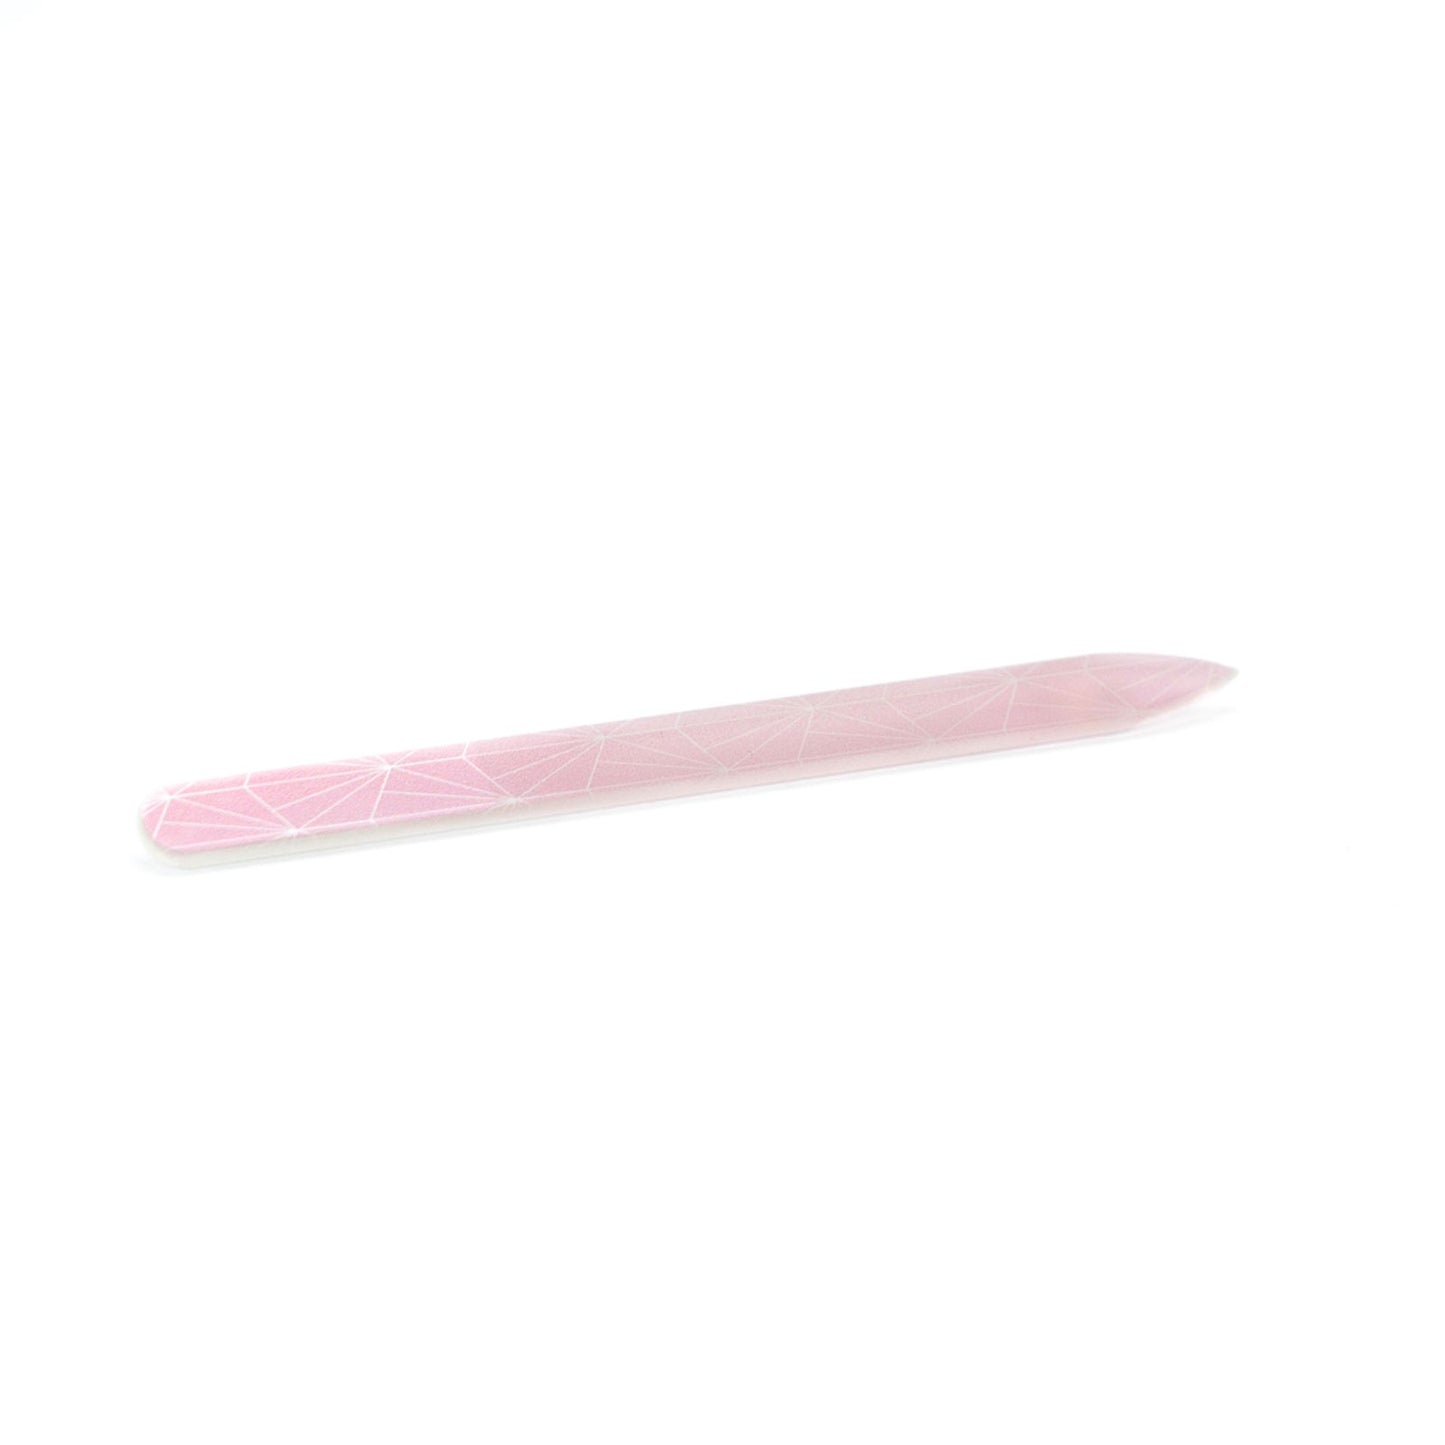 pink geometric glass nail file on a white background